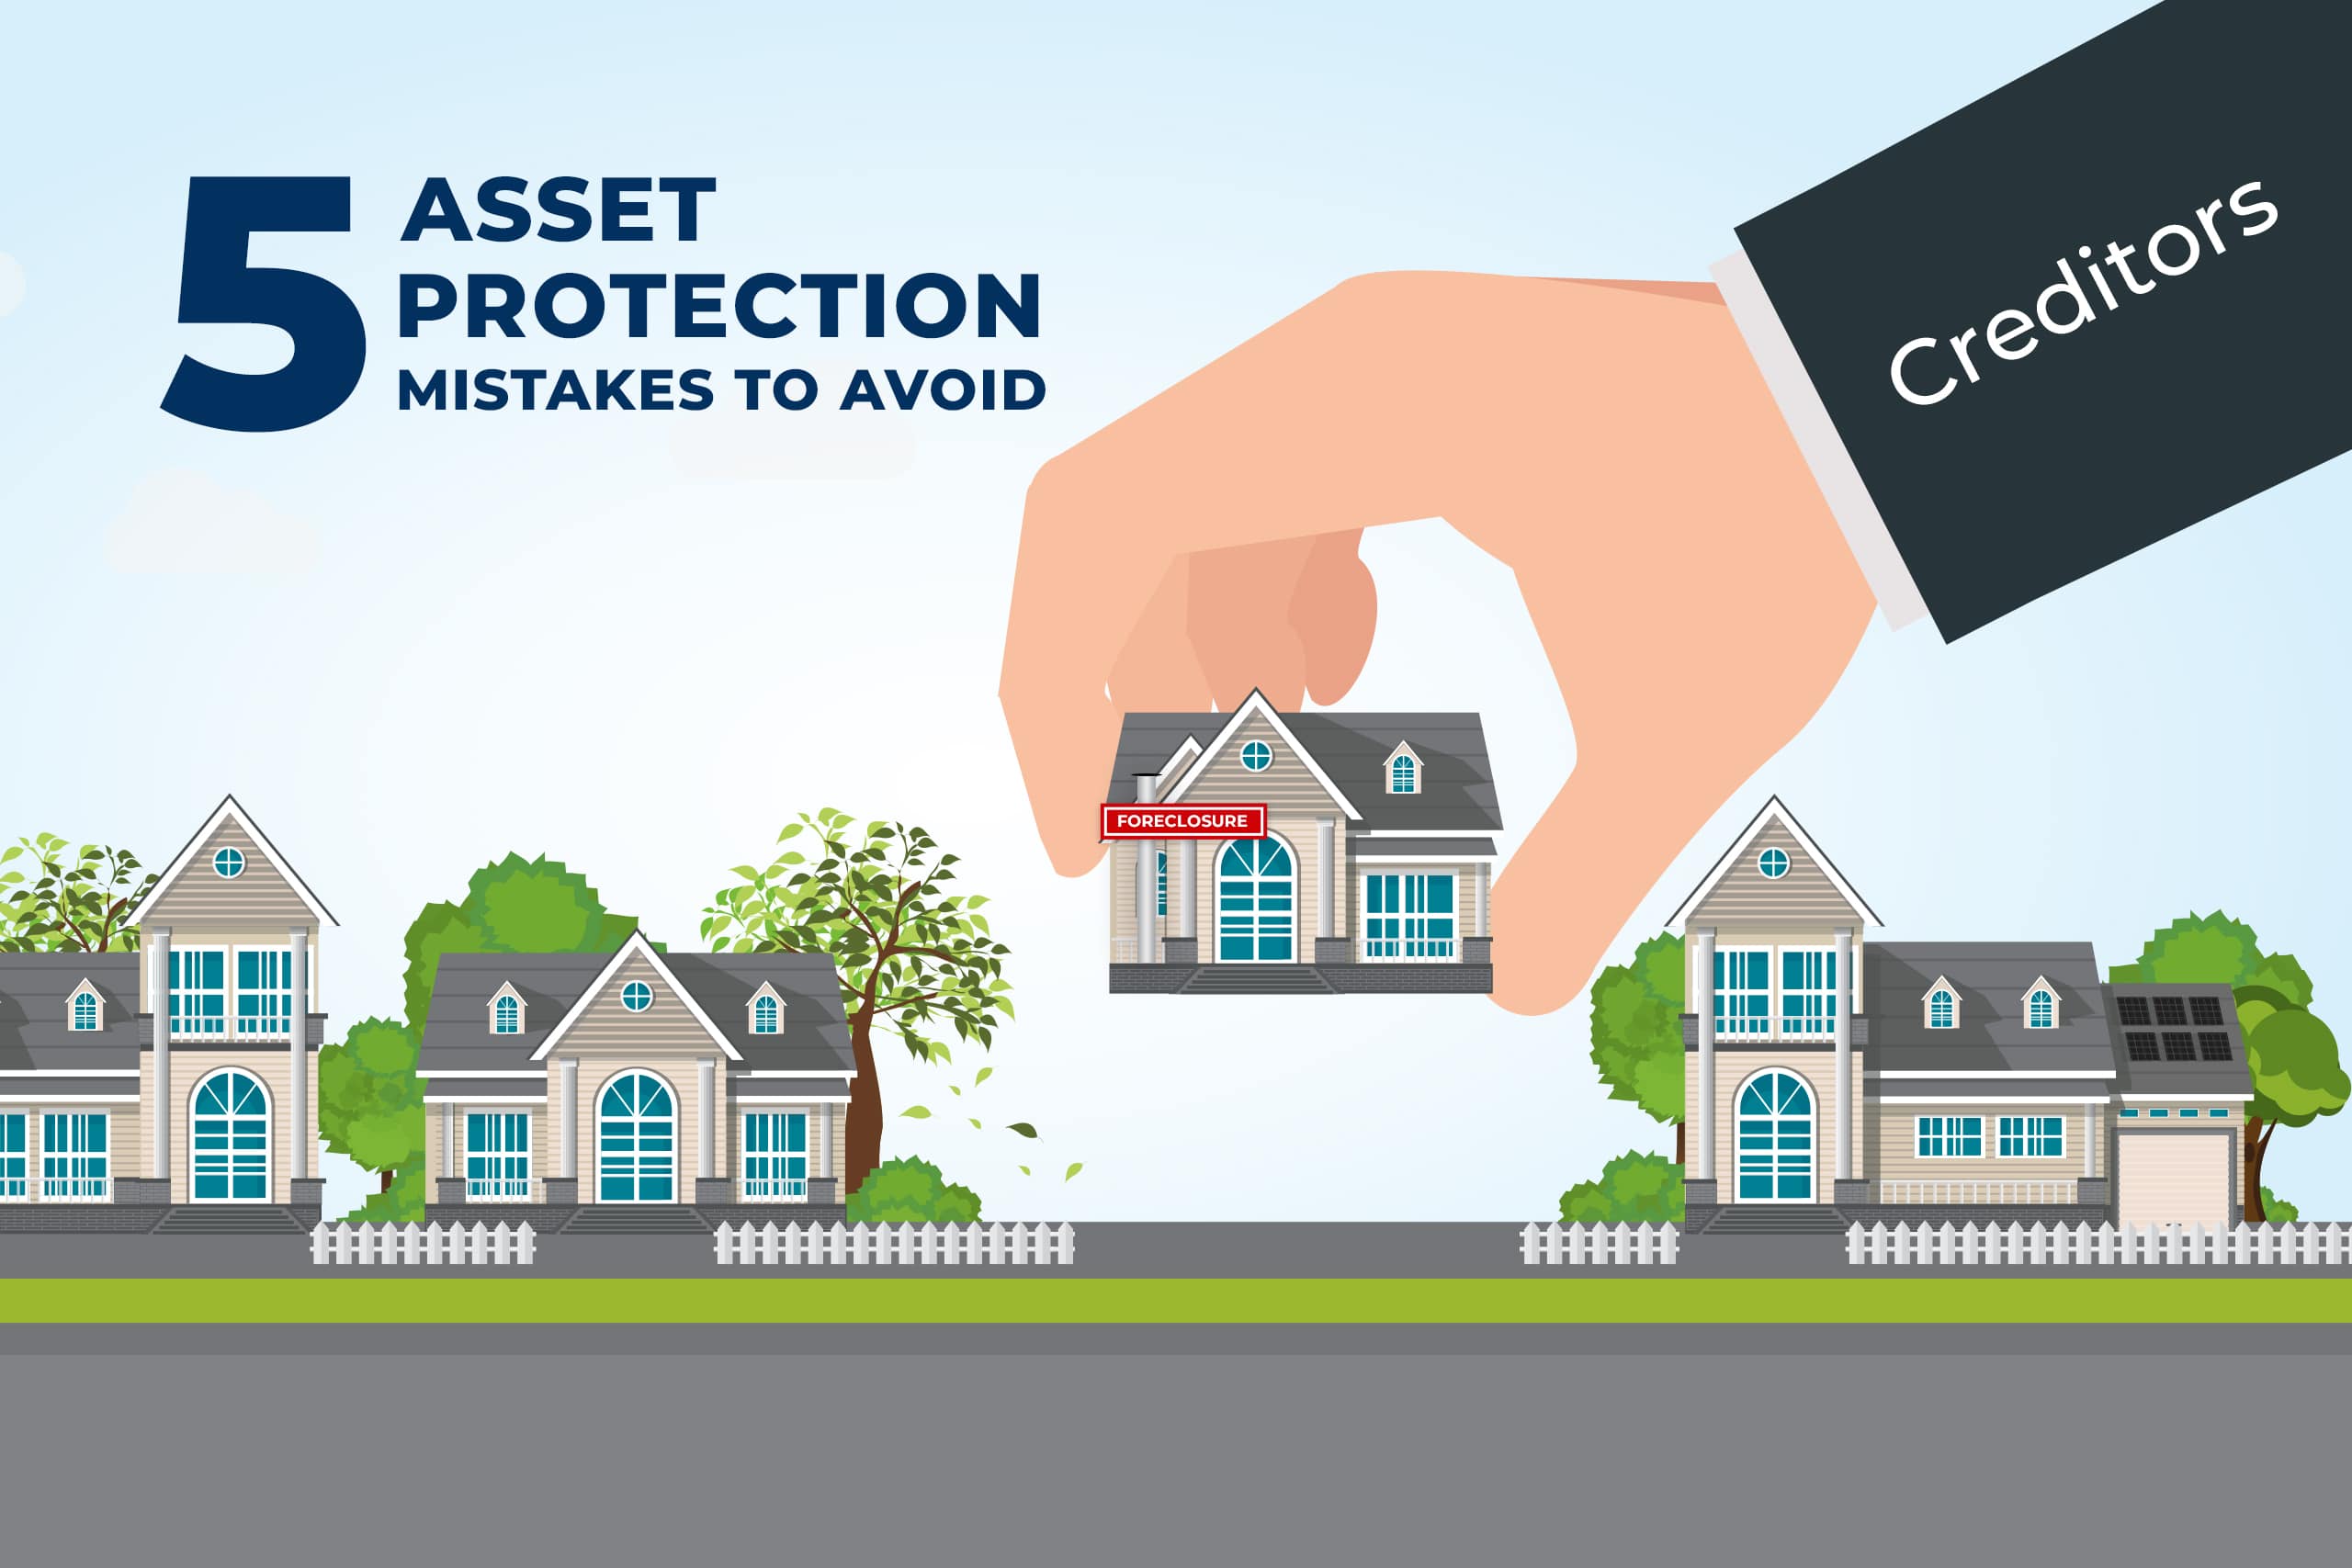 Asset protection mistakes to avoid